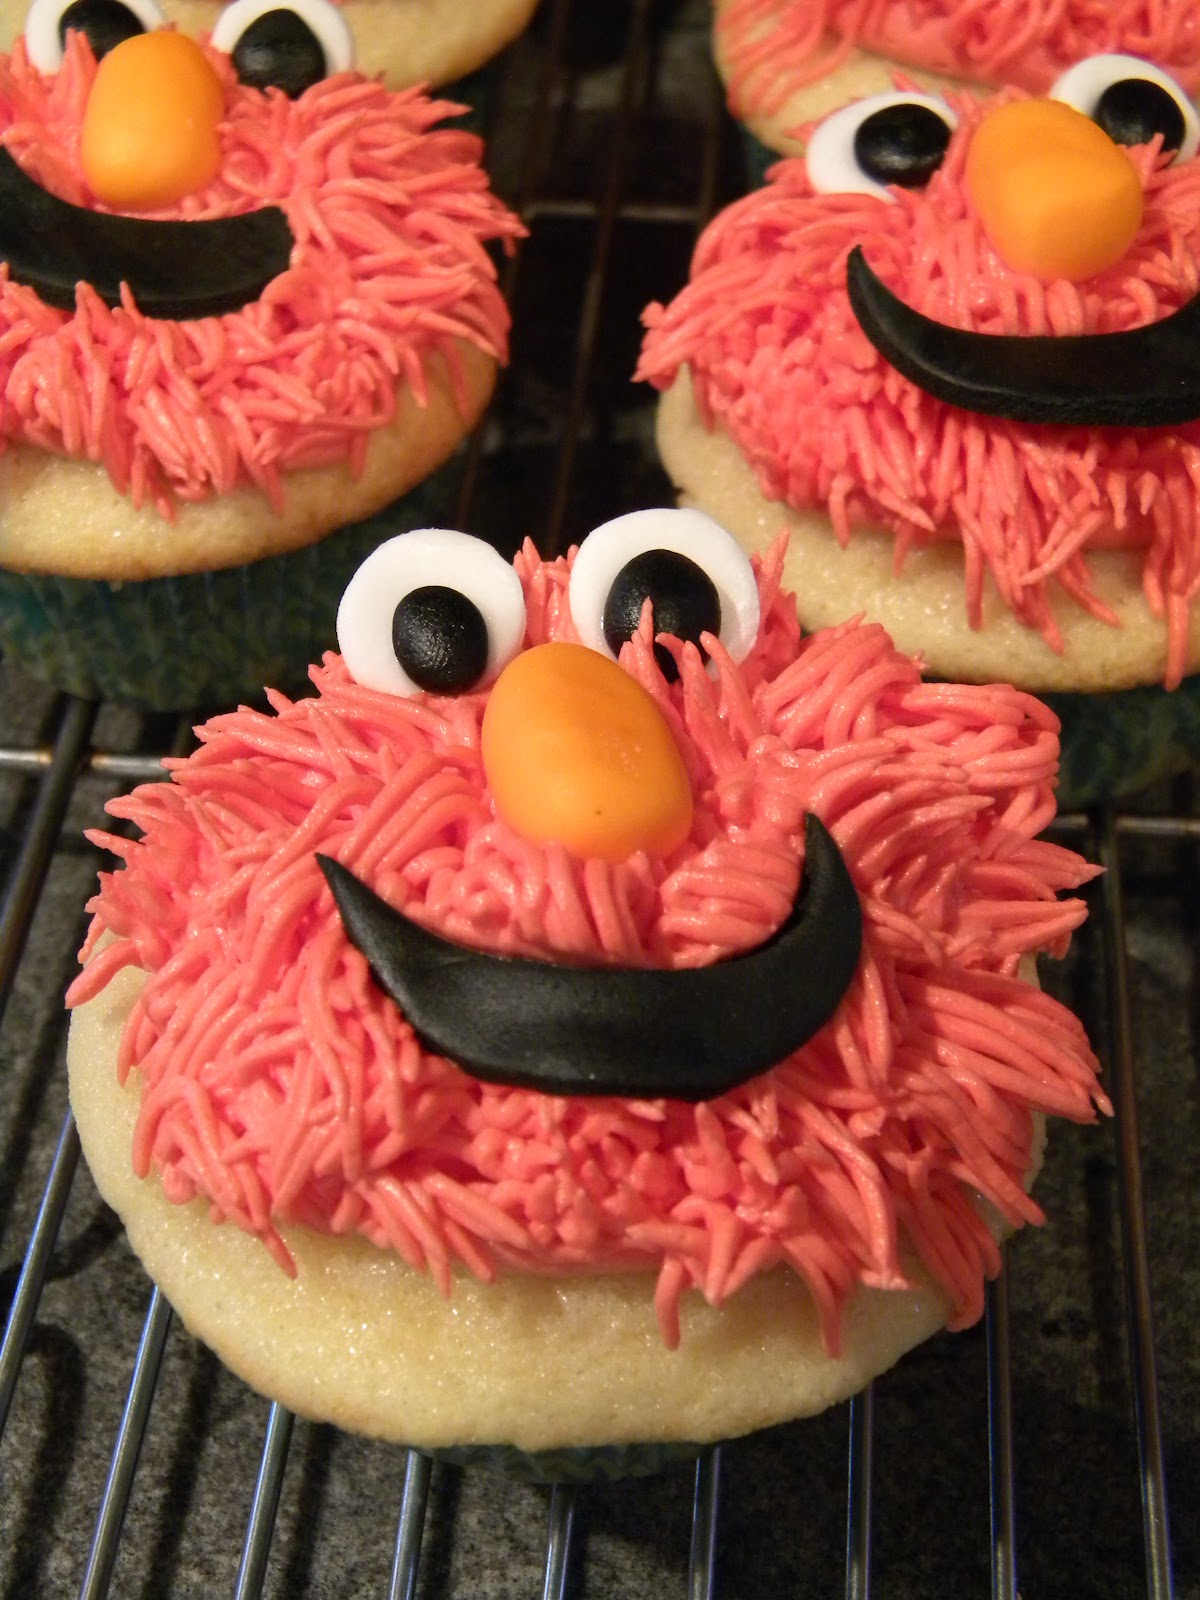 Ze Cookie Lounge: Cookie Monster and Elmo Cupcakes